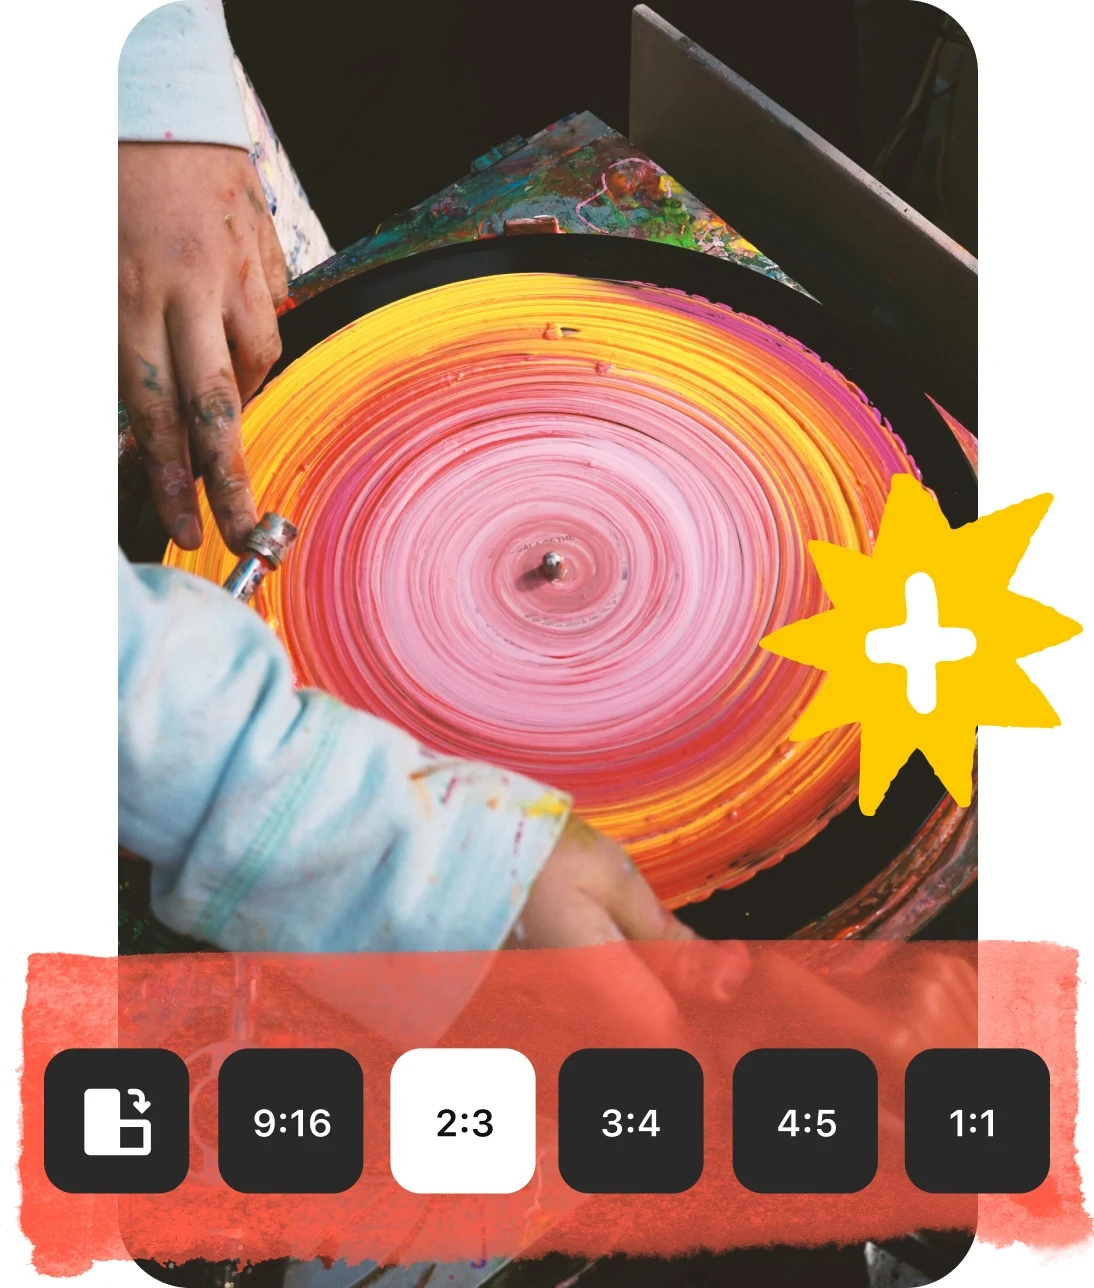 Collage of pin sizes icons and image of hands spinning painted record